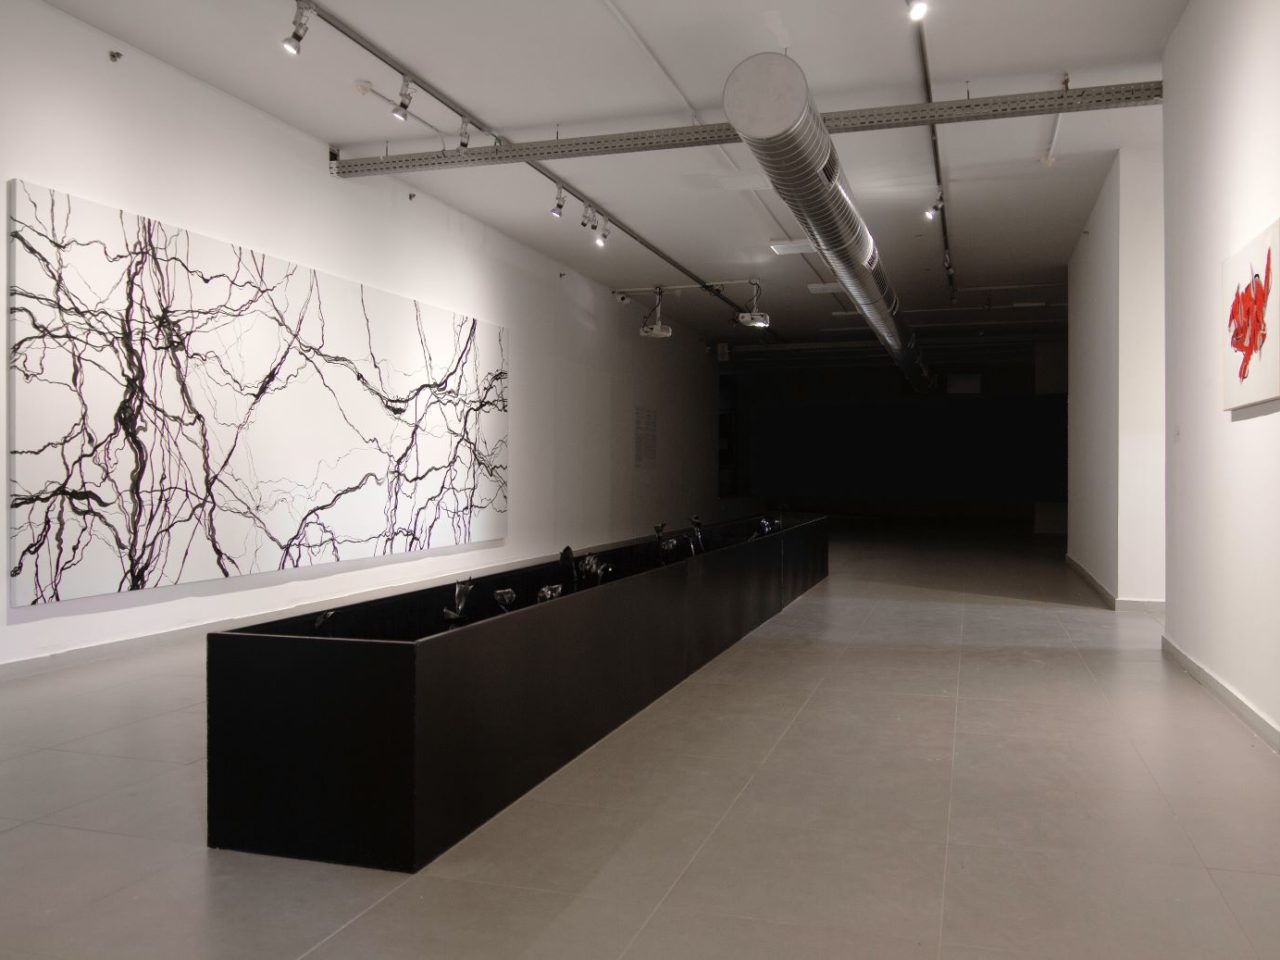 In a white gallery space, there is a large, long painting on the wall. The painting has a white background and black lines that bend and curl irregularly. In the middle of the Gallery space is a black case, longer the length of the painting.